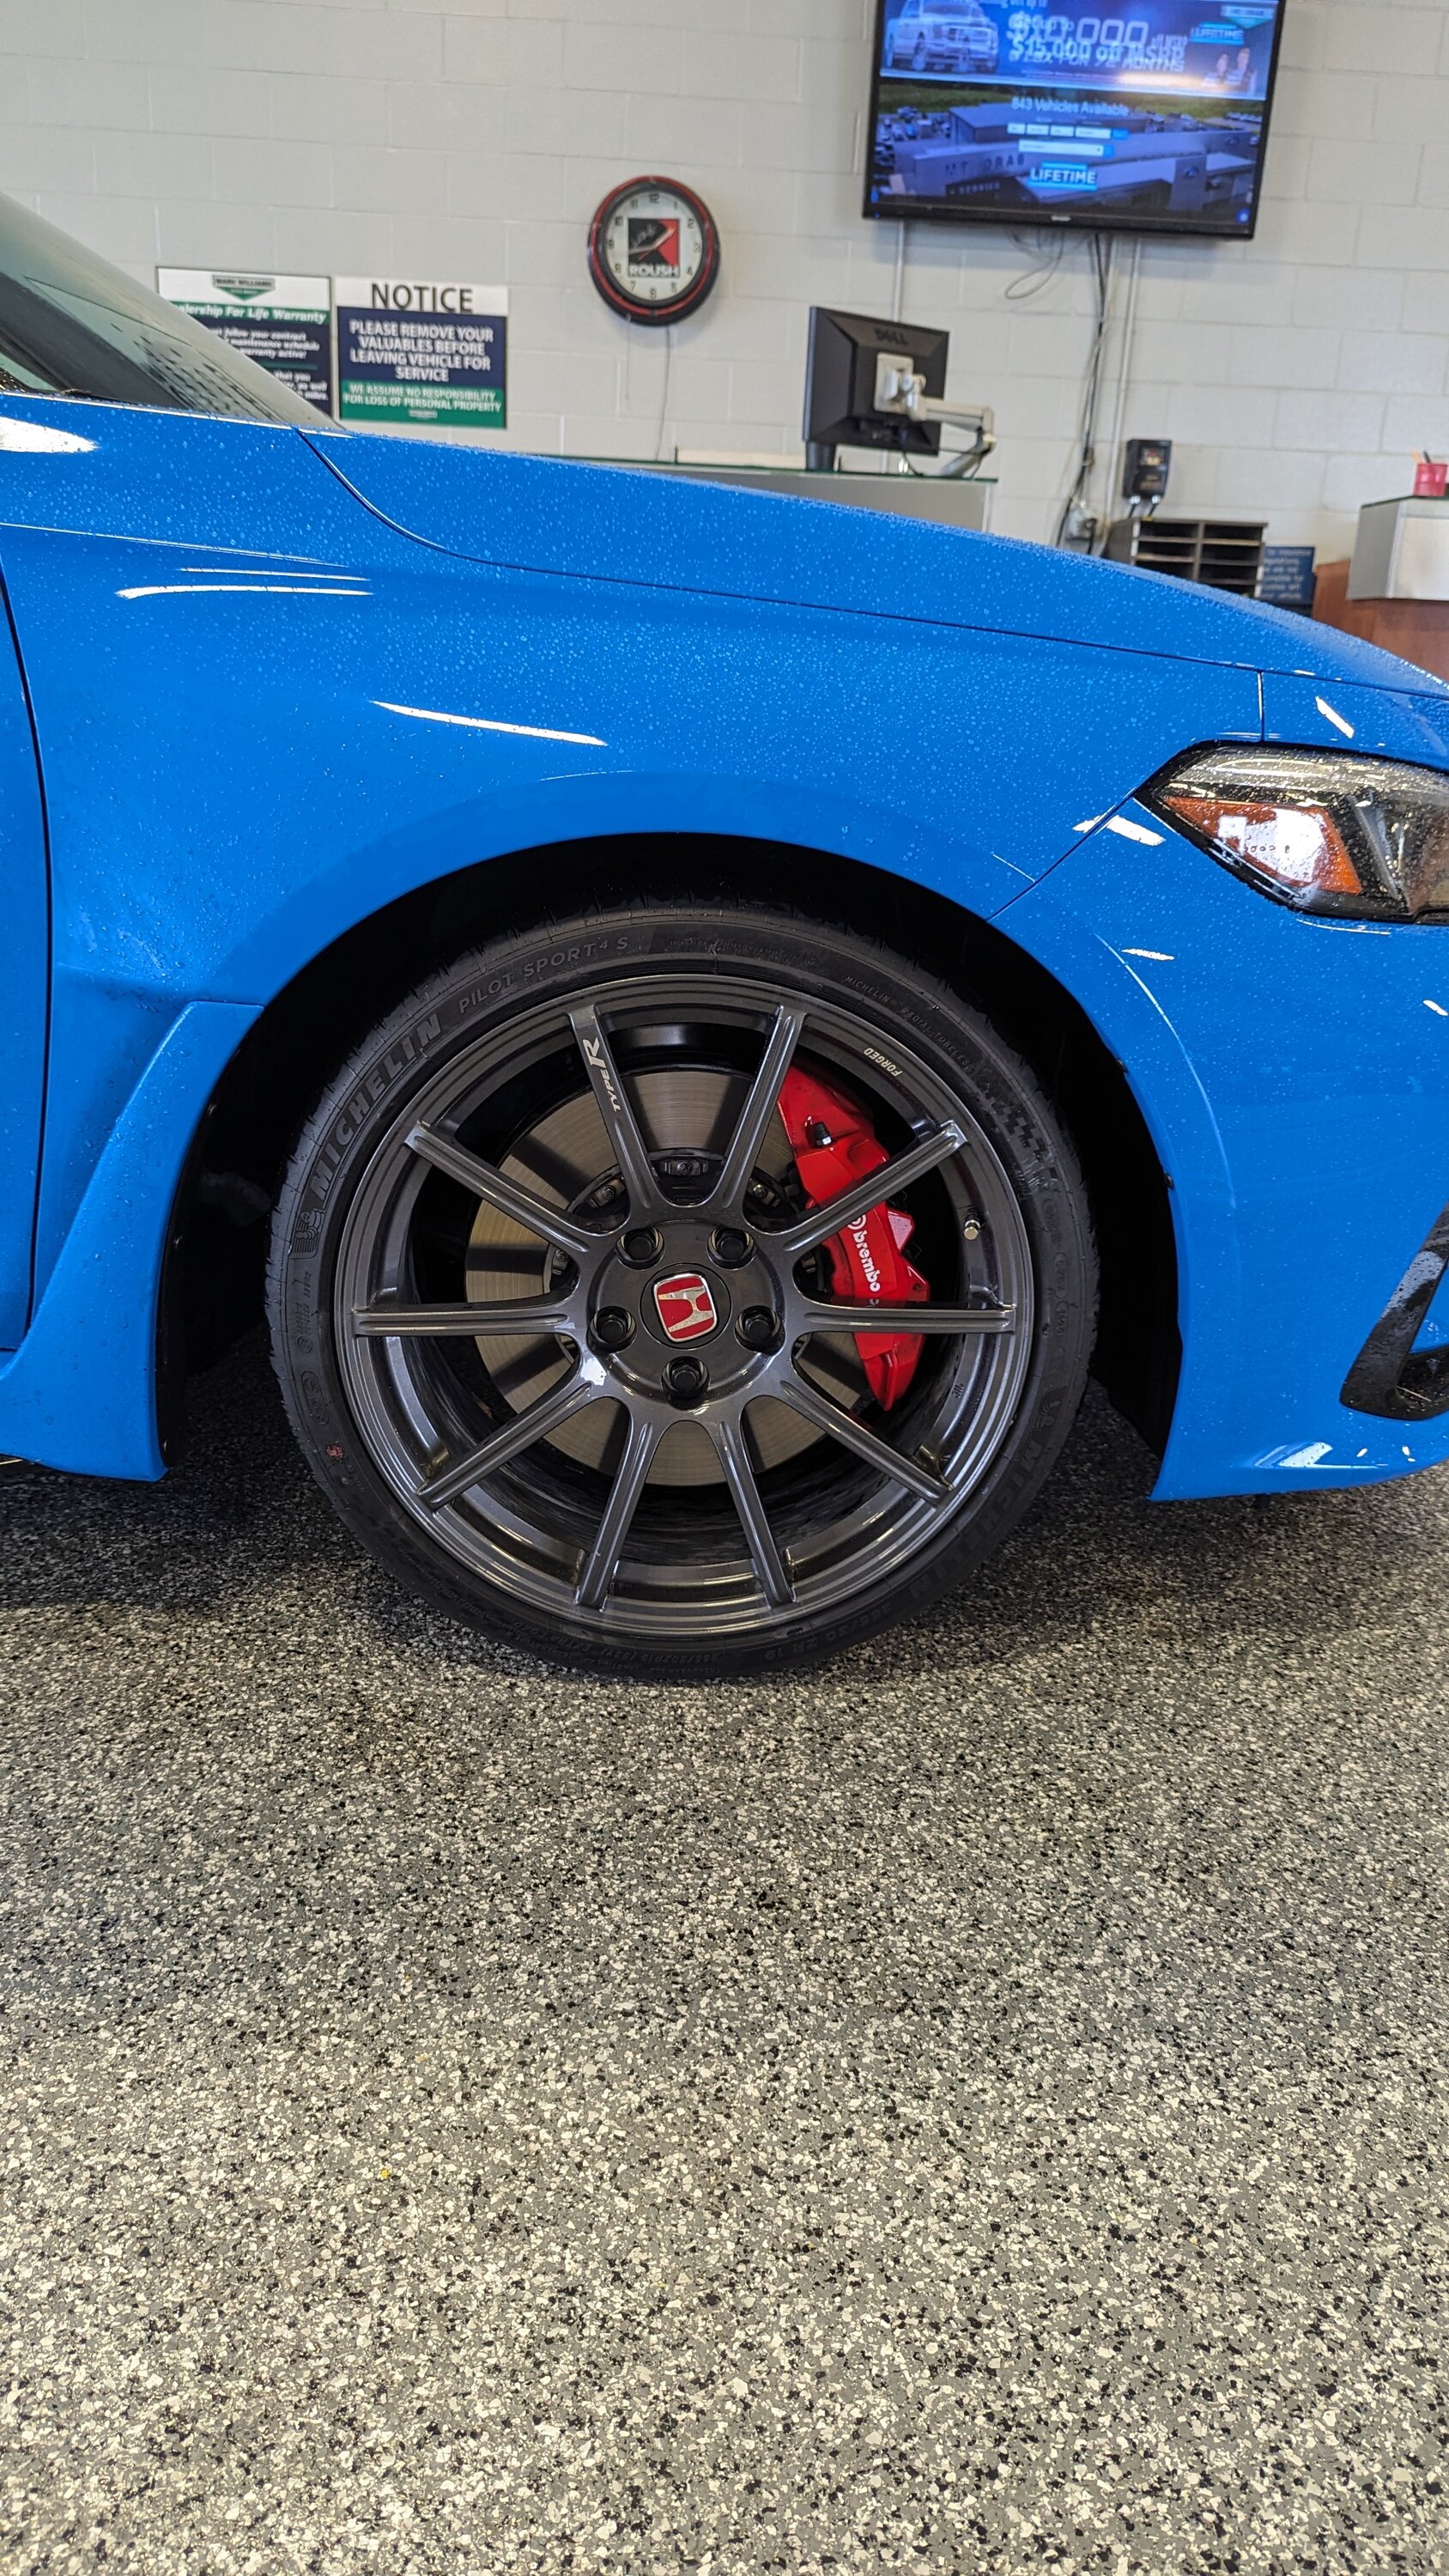 11th Gen Honda Civic Promised Pics of the 10 spoke forged wheels 1000001324